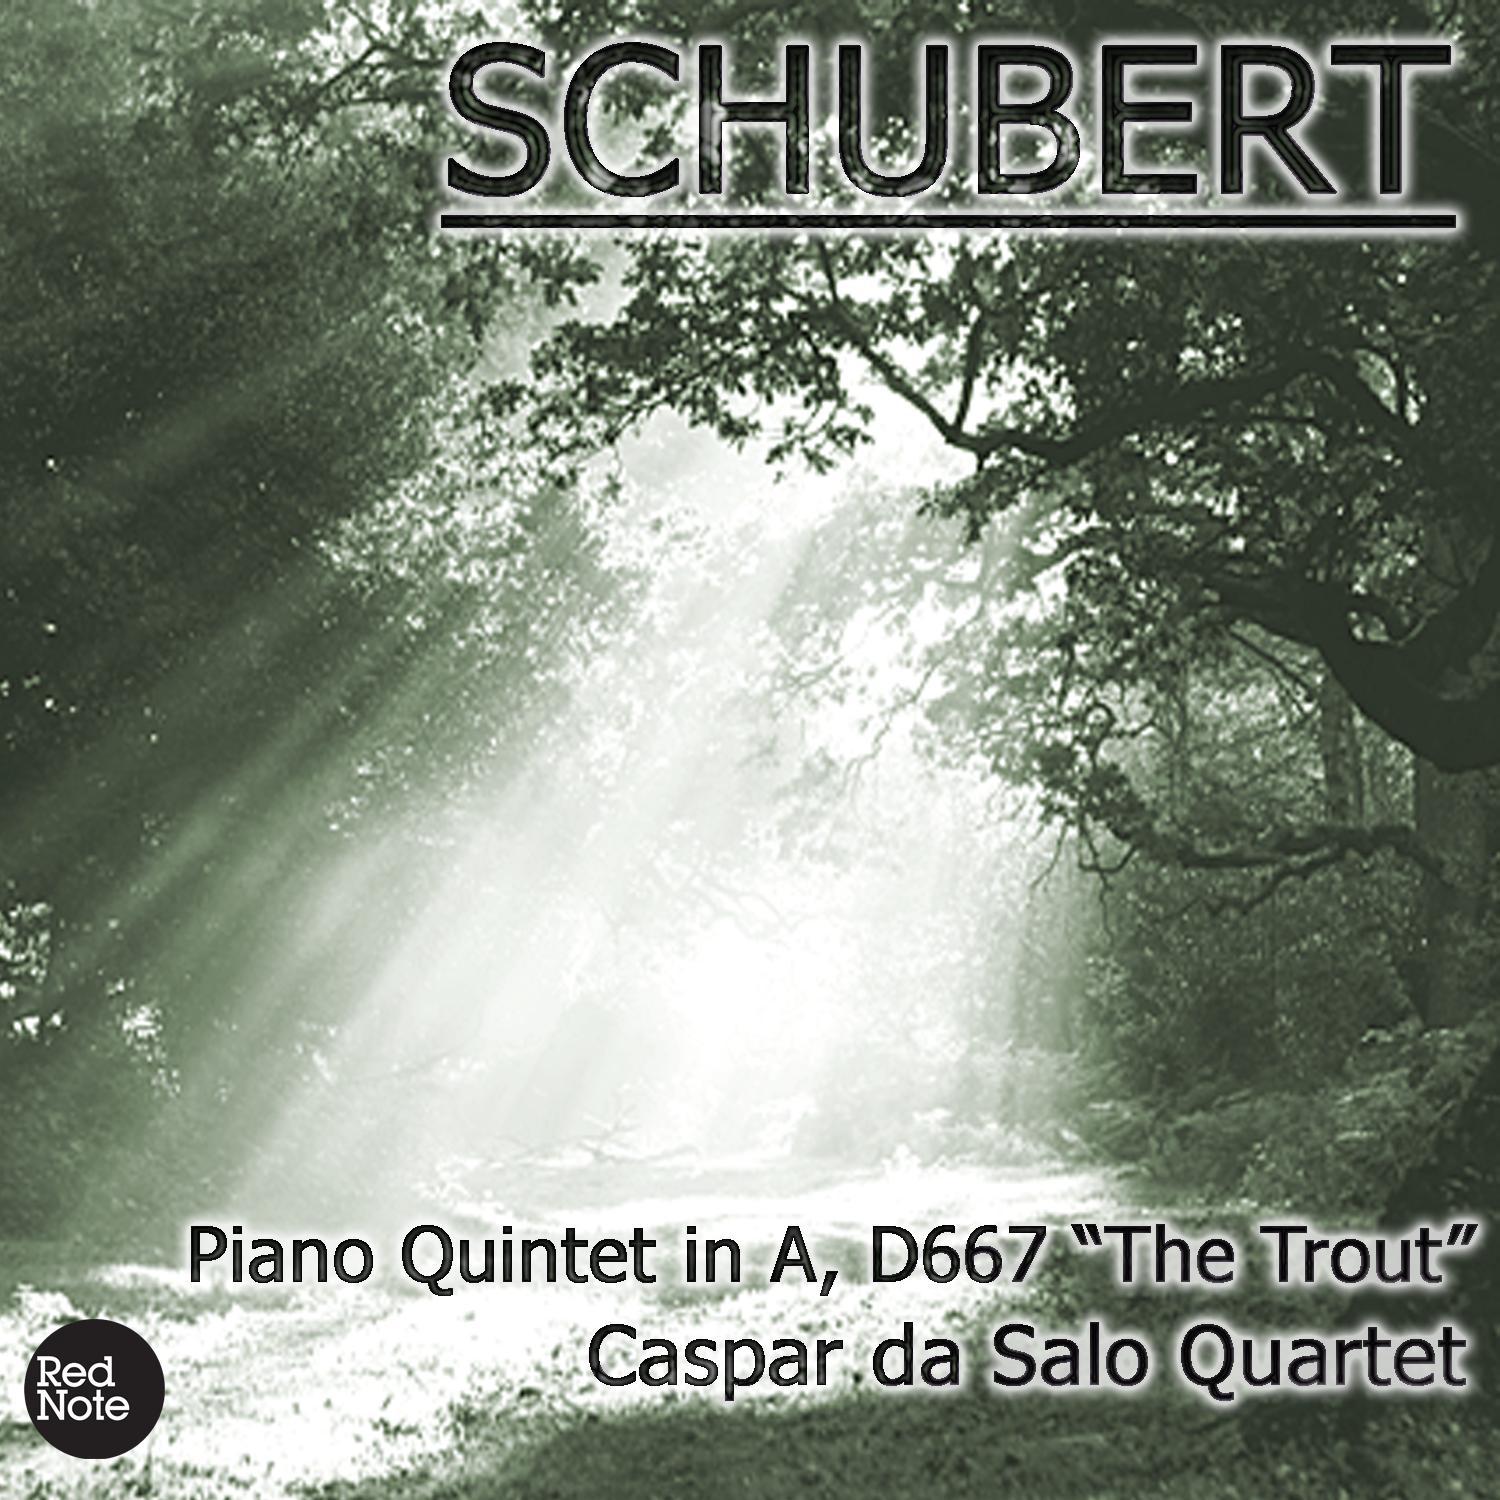 Schubert: Piano Quintet in A, D667 "The Trout"